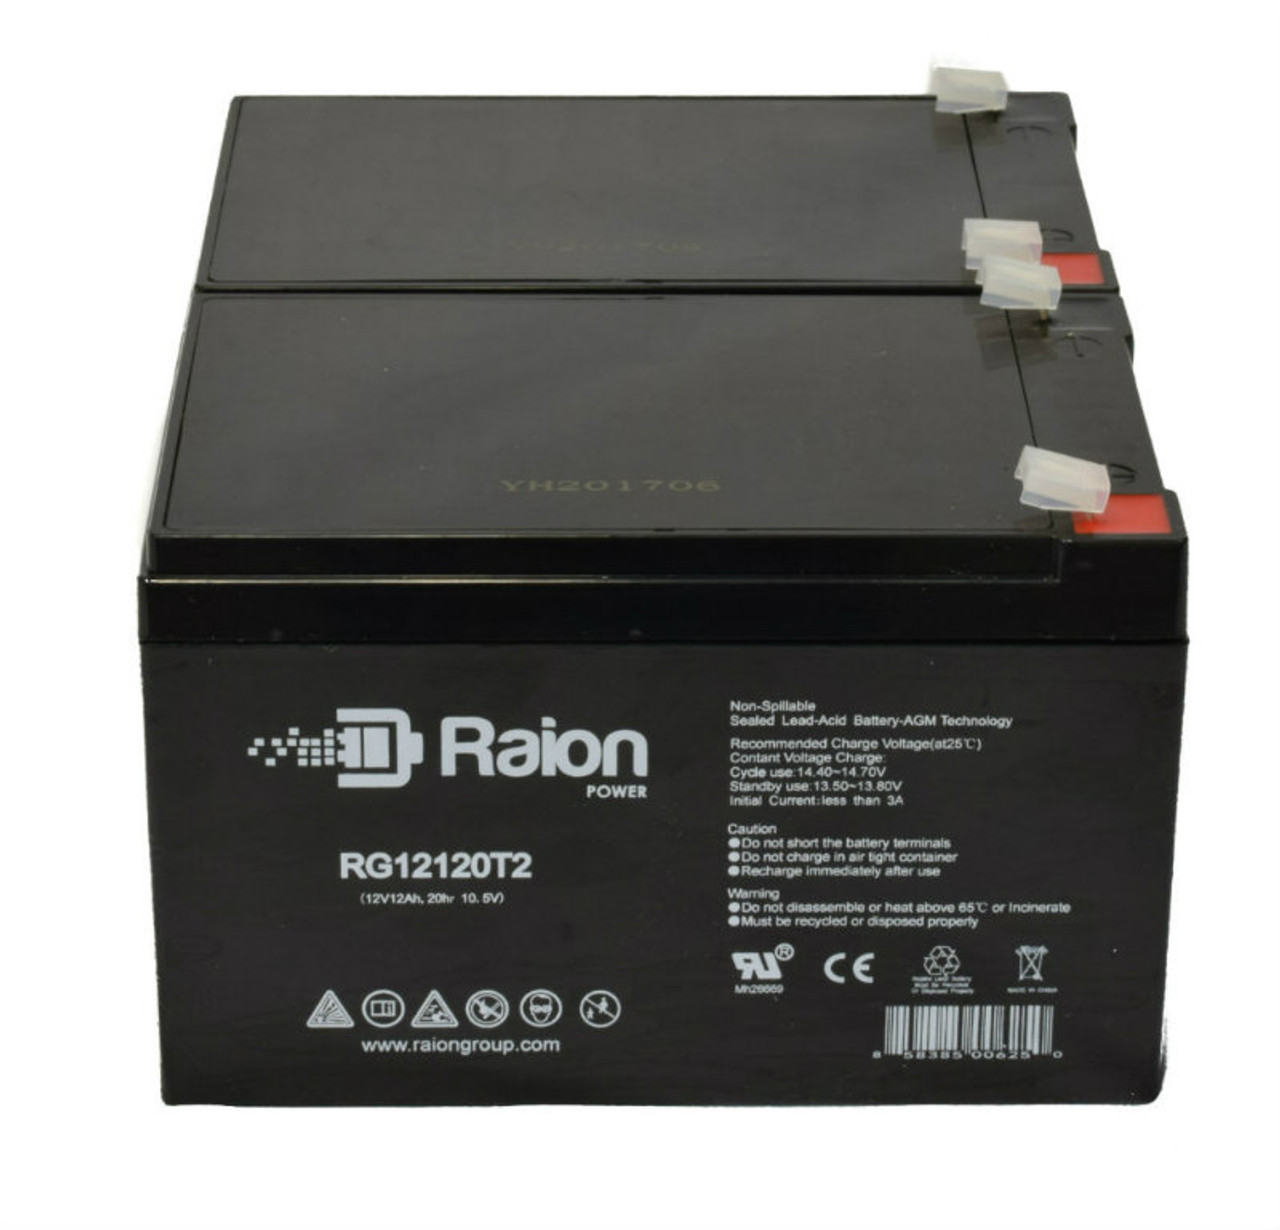 Raion Power RG12120T2 Replacement Battery Set for CTM HS-120 Mobility Scooter - 2 Pack